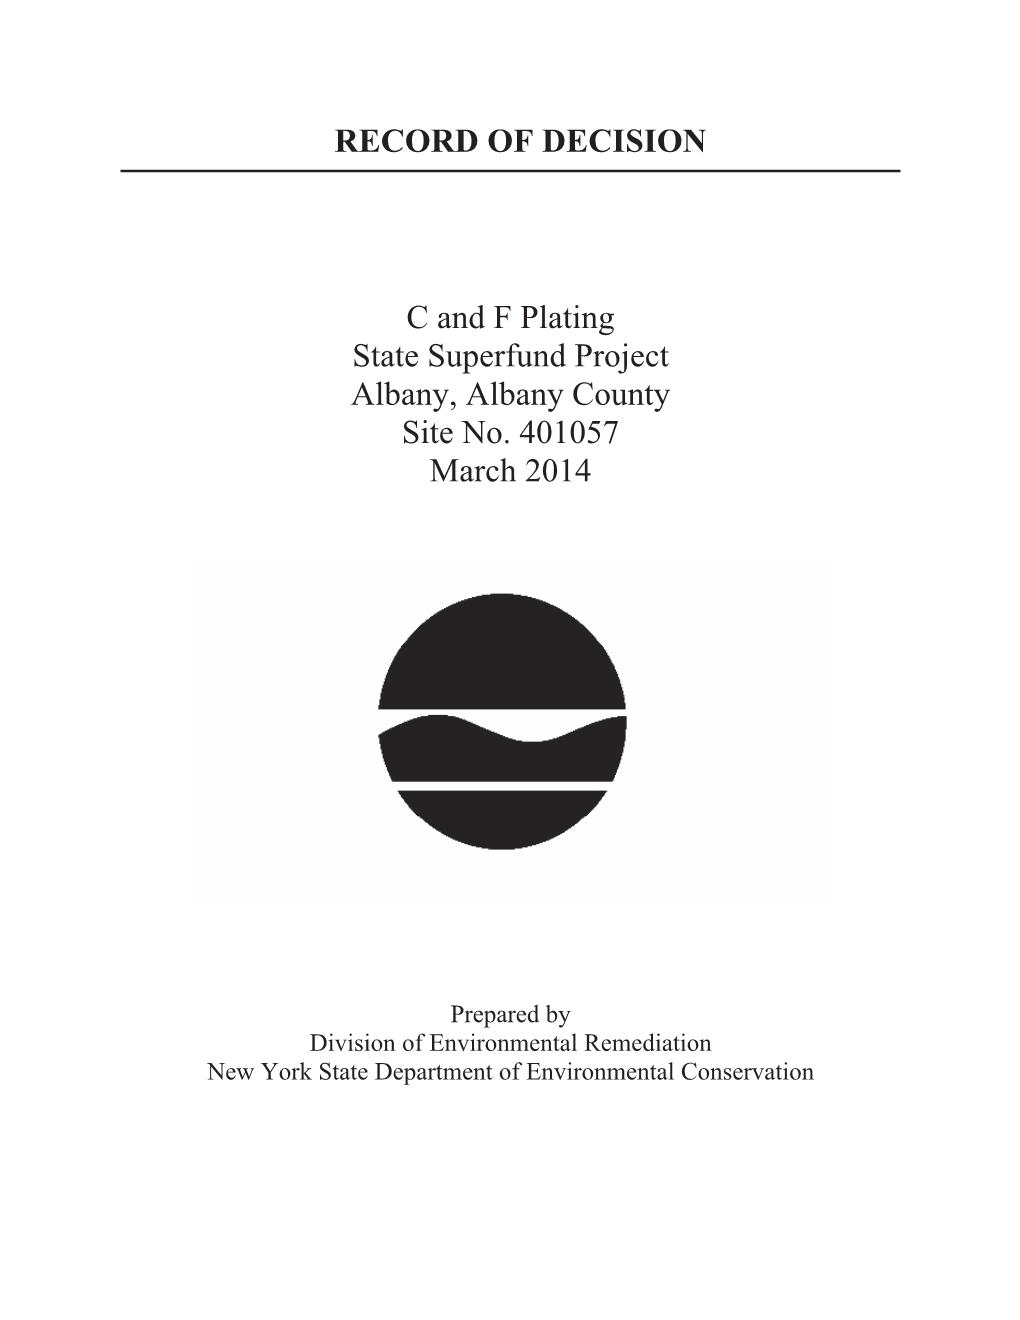 RECORD of DECISION C and F Plating State Superfund Project